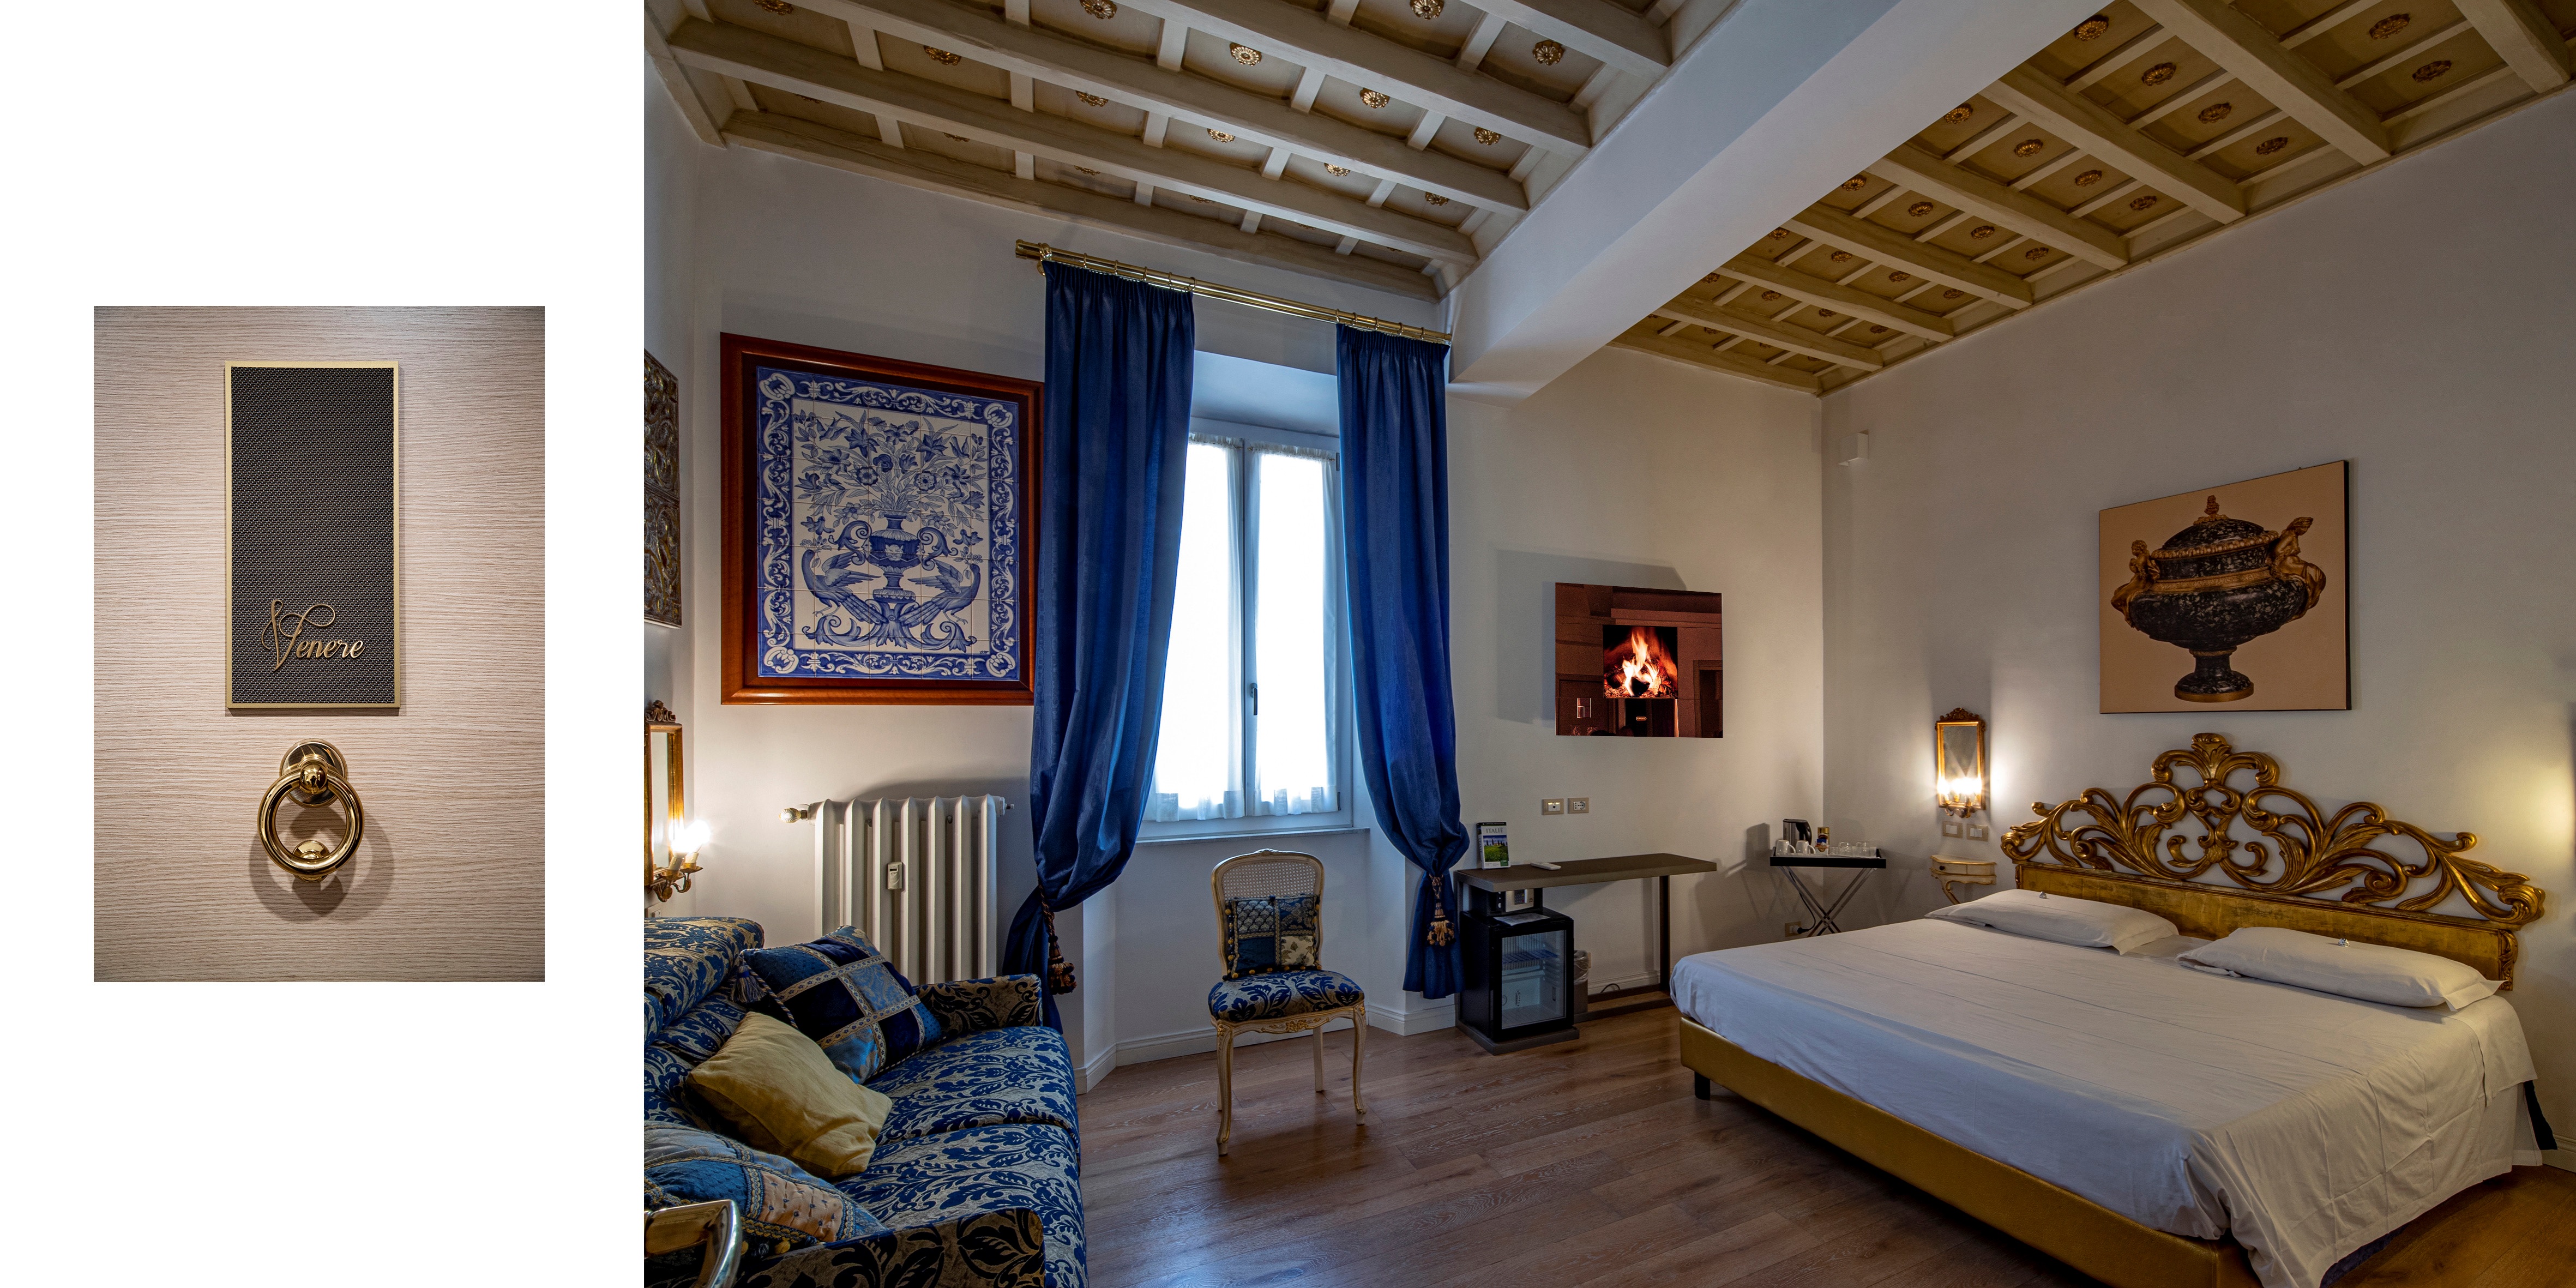 The elegant Venere Suite at the Excellent Trinity Rooms in Rome for a wonderful holiday in Italy.